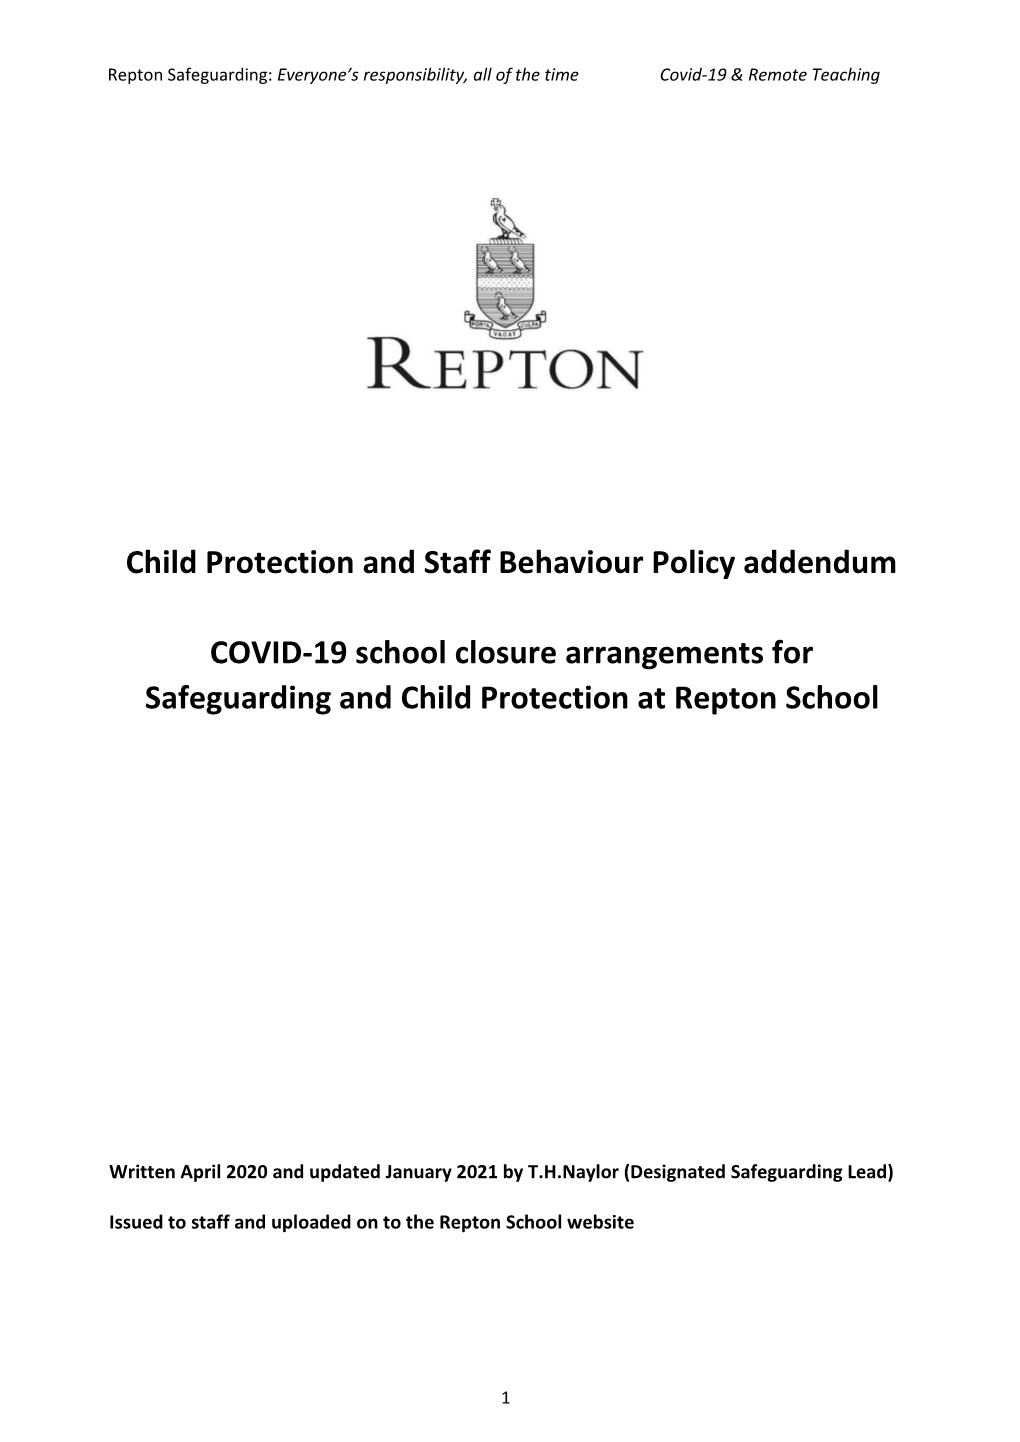 Child Protection and Staff Behaviour Policy Addendum